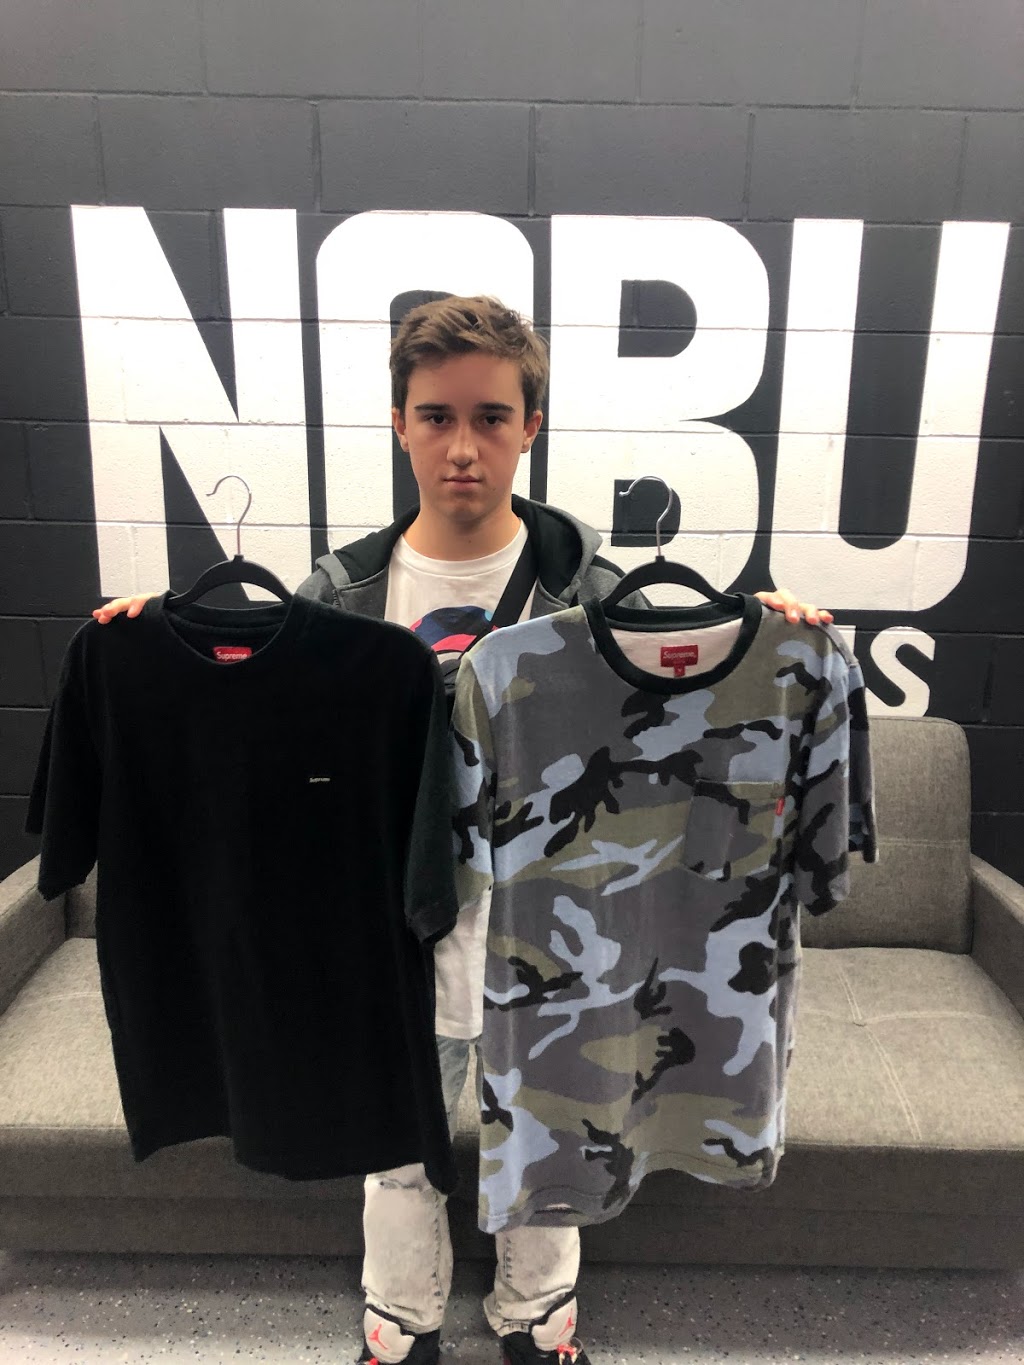 NOBU (No One But Us) | clothing store | 2885 Lauzon Pkwy Unit 101F, Windsor, ON N8T 3H5, Canada | 5199443300 OR +1 519-944-3300